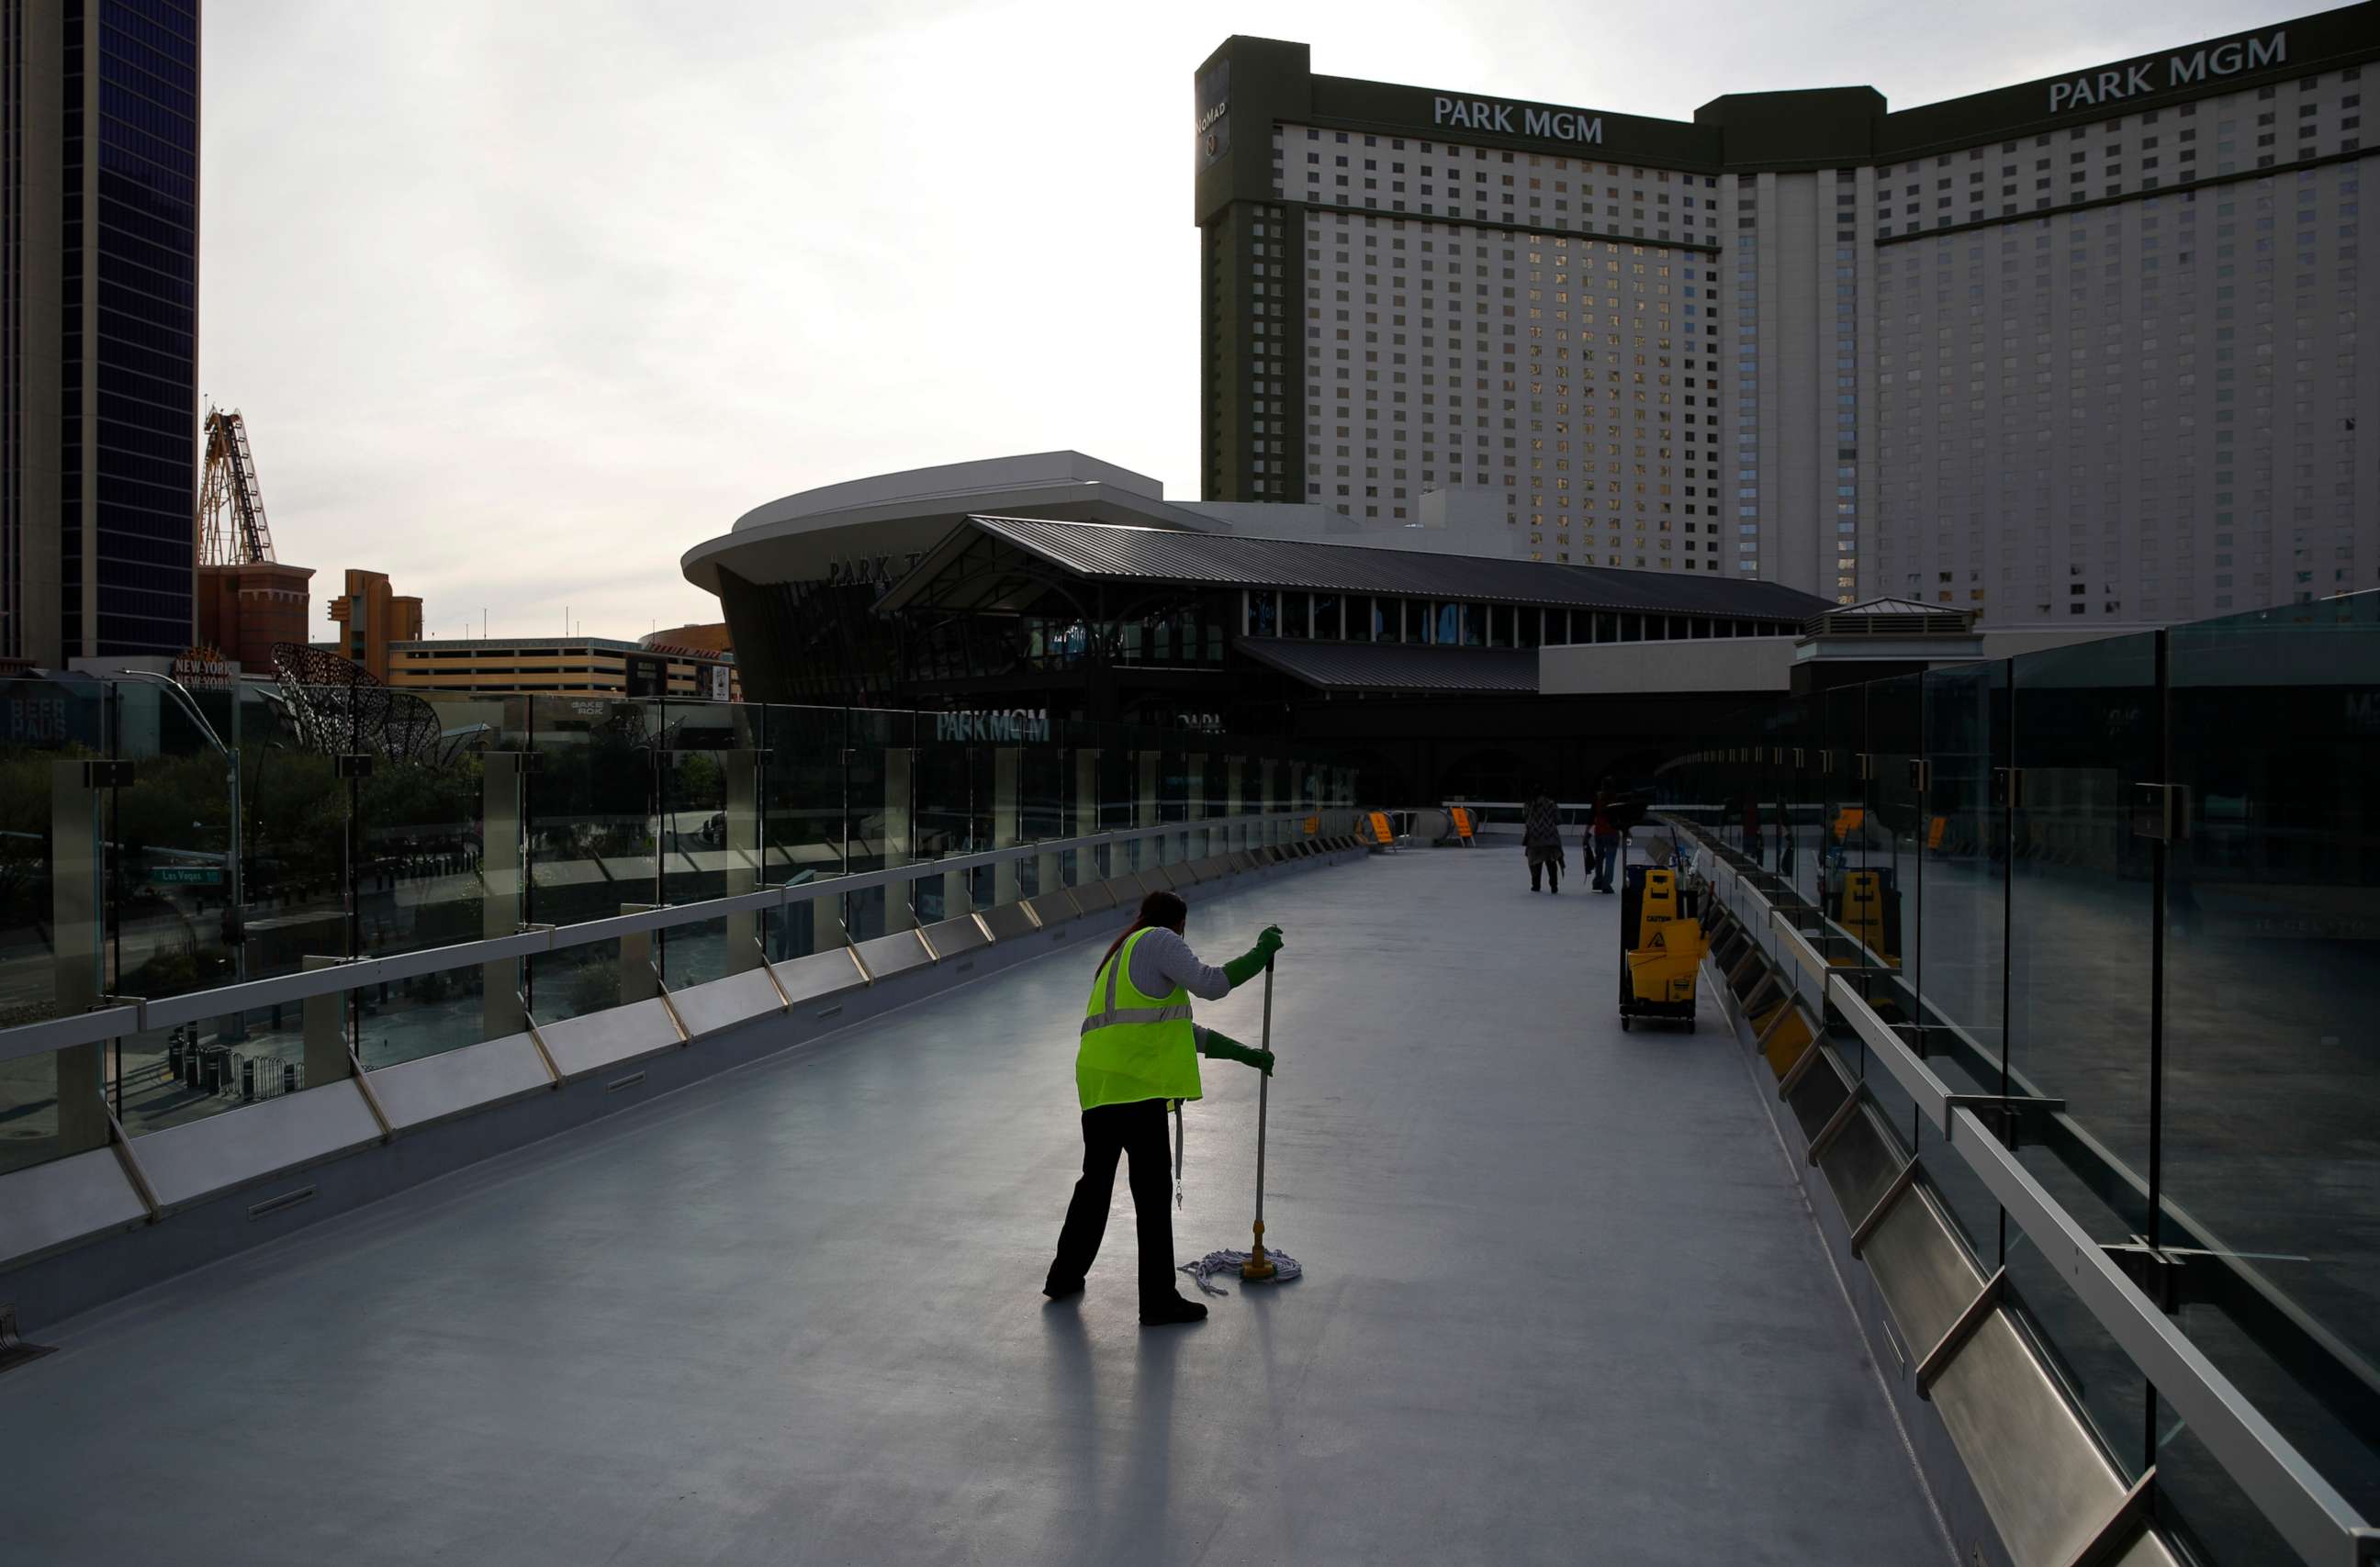 PHOTO: A worker cleans along the Las Vegas Strip devoid of the usual crowds as casinos and other business are shuttered due to the coronavirus outbreak in Las Vegas, March 31, 2020.